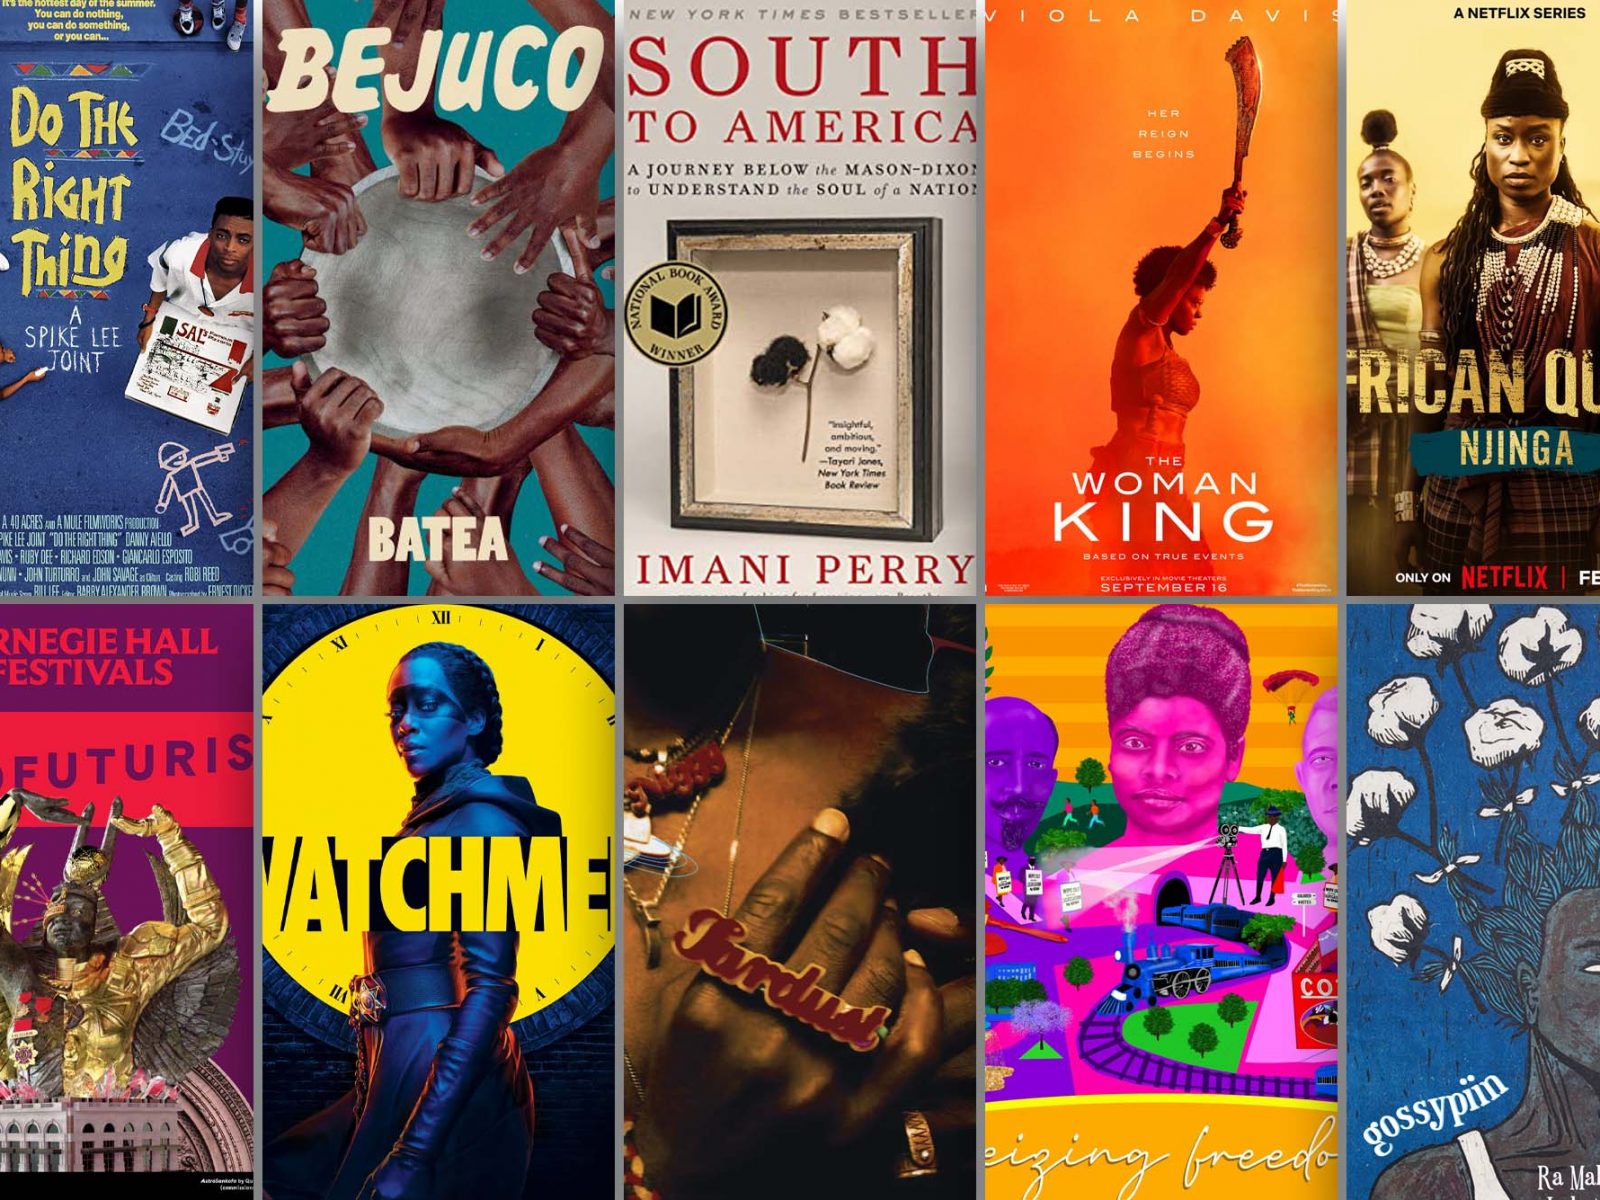 42 Black History Movies 2023 - Movies for Black History Month